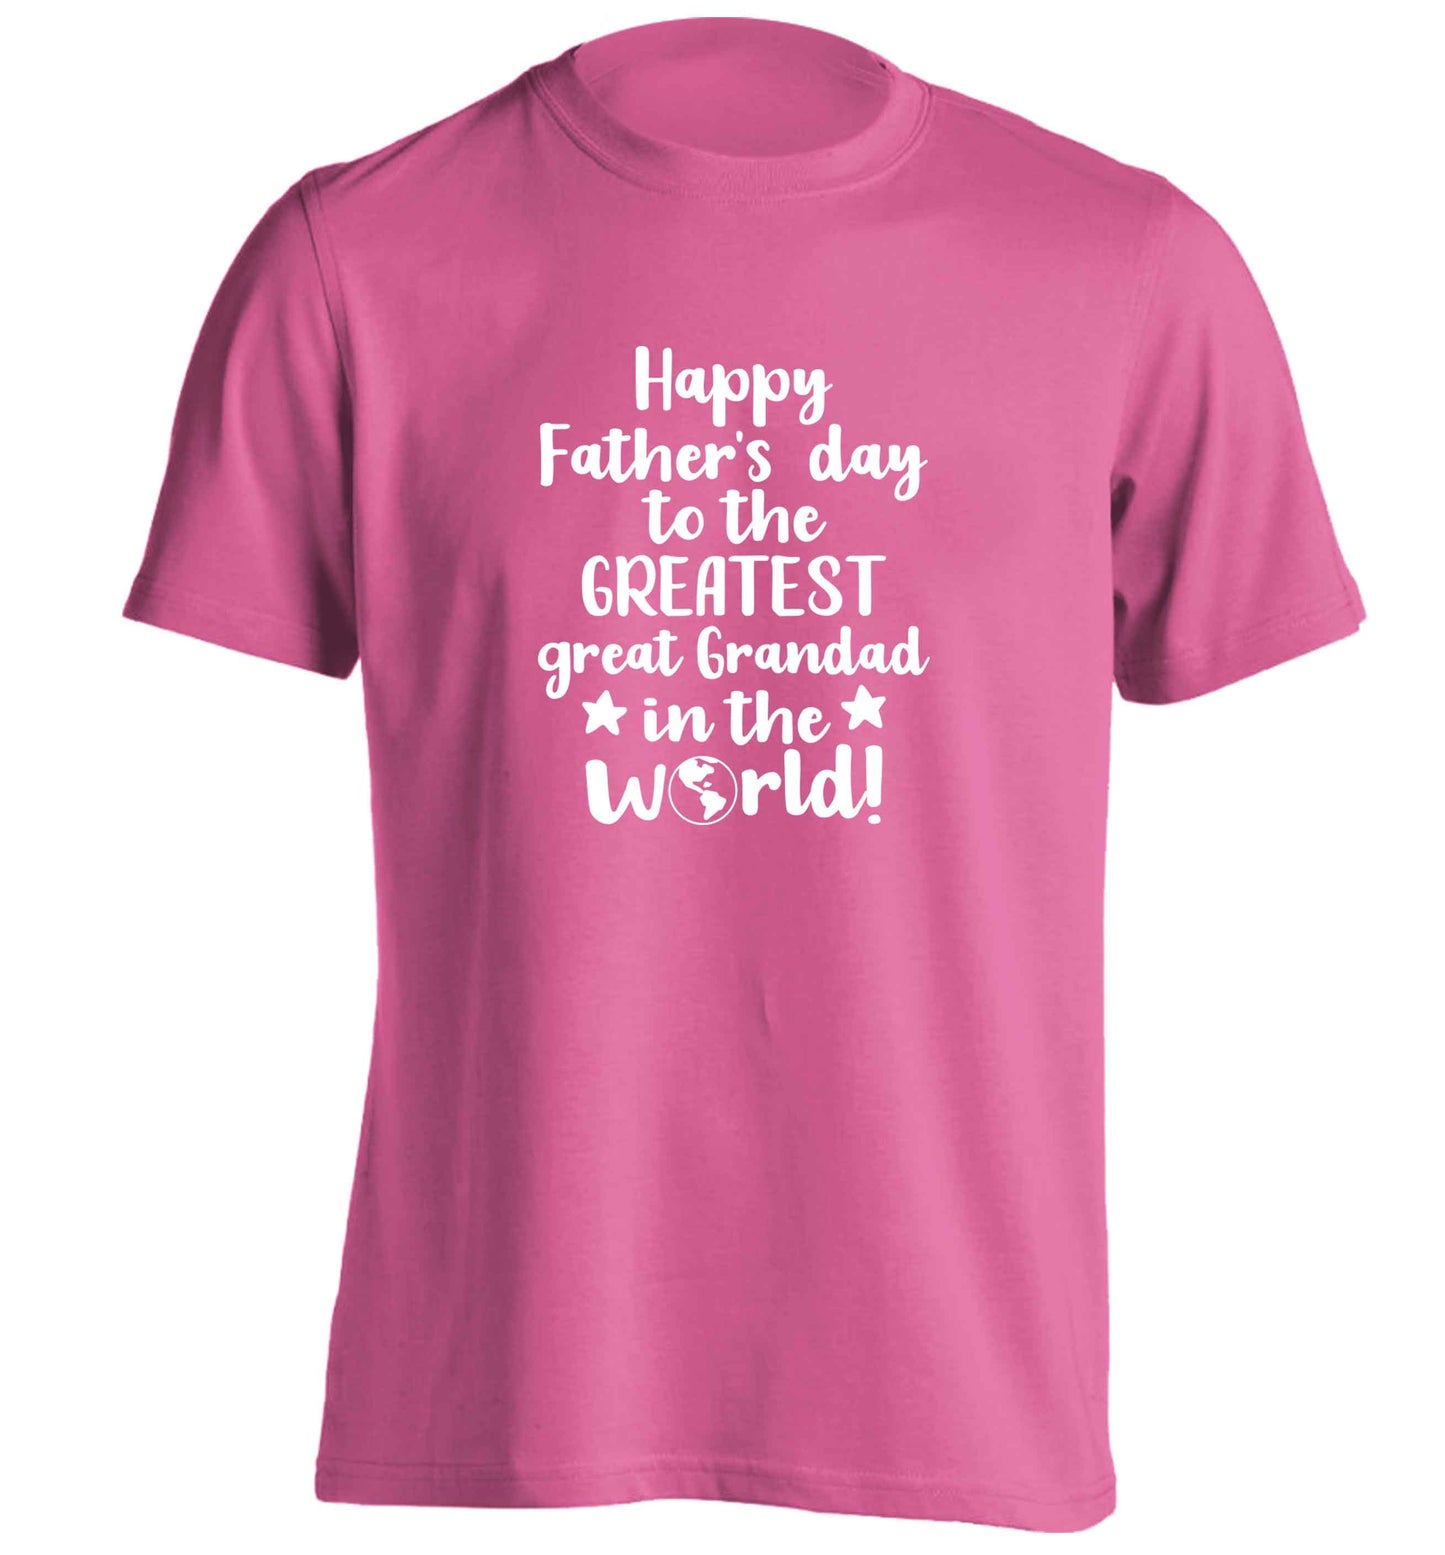 Happy Father's day to the greatest great grandad in the world adults unisex pink Tshirt 2XL